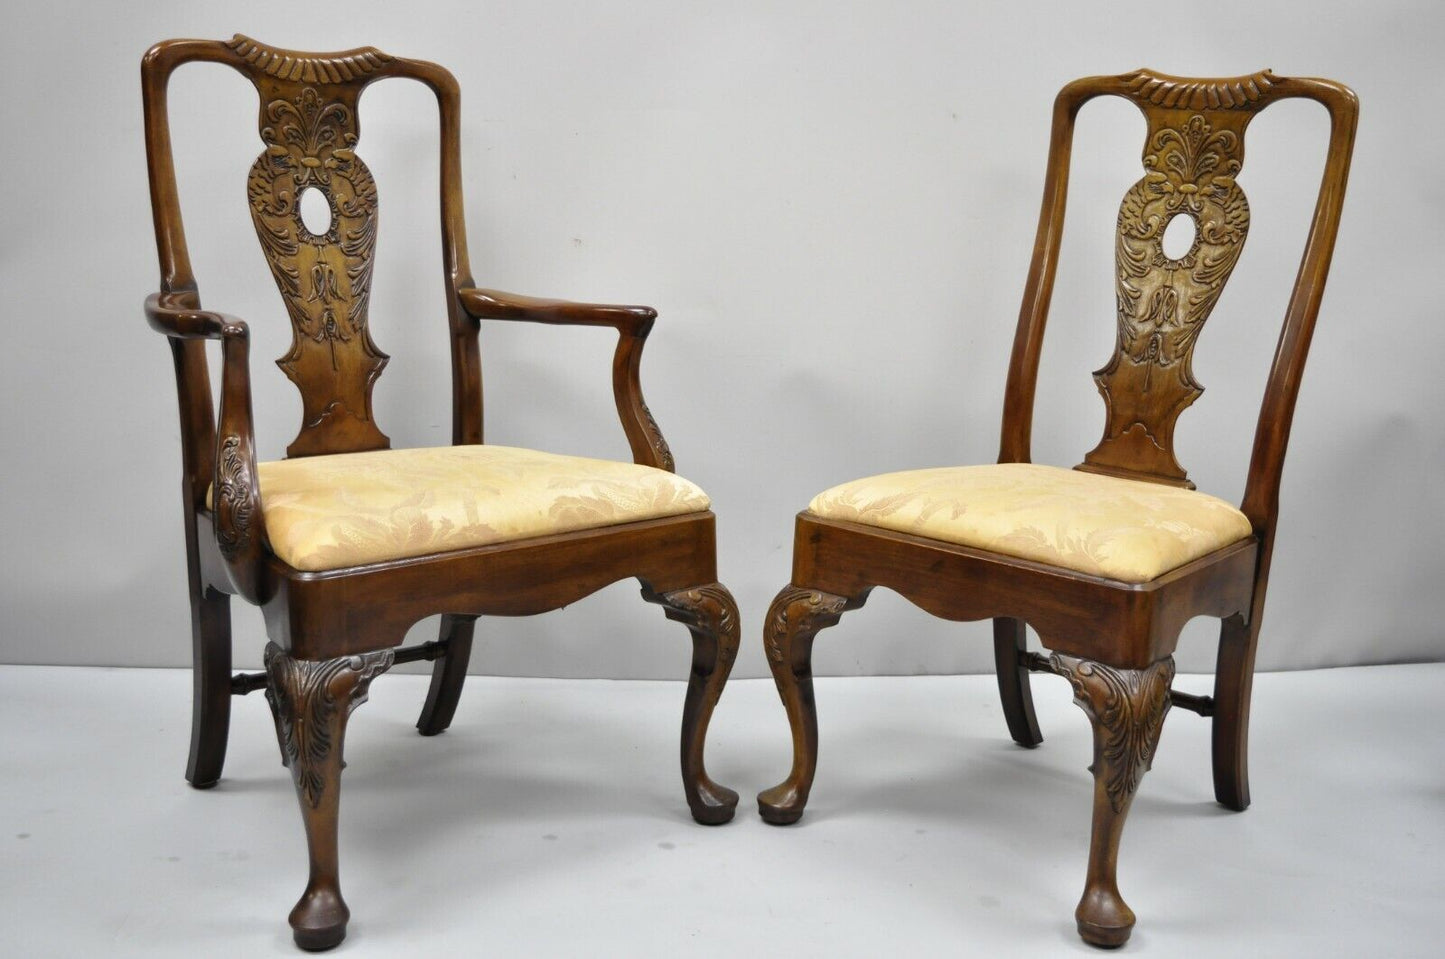 6 Henredon Aston Court Carved Wood Oriental Georgian Dining Chairs with Birds